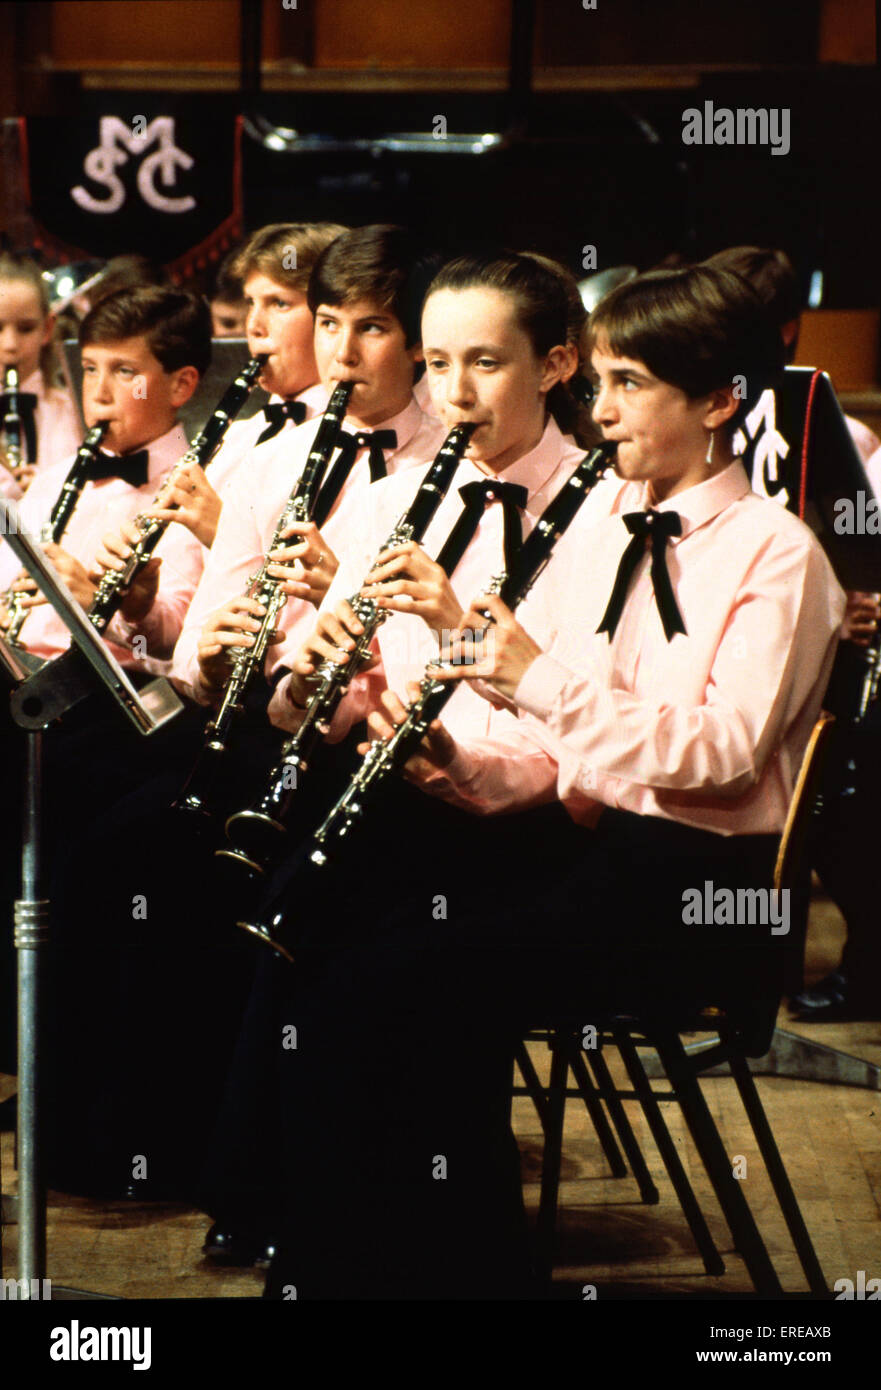 Boys playing clarinet in youth orchestra All seated and wearing same shirts Stock Photo